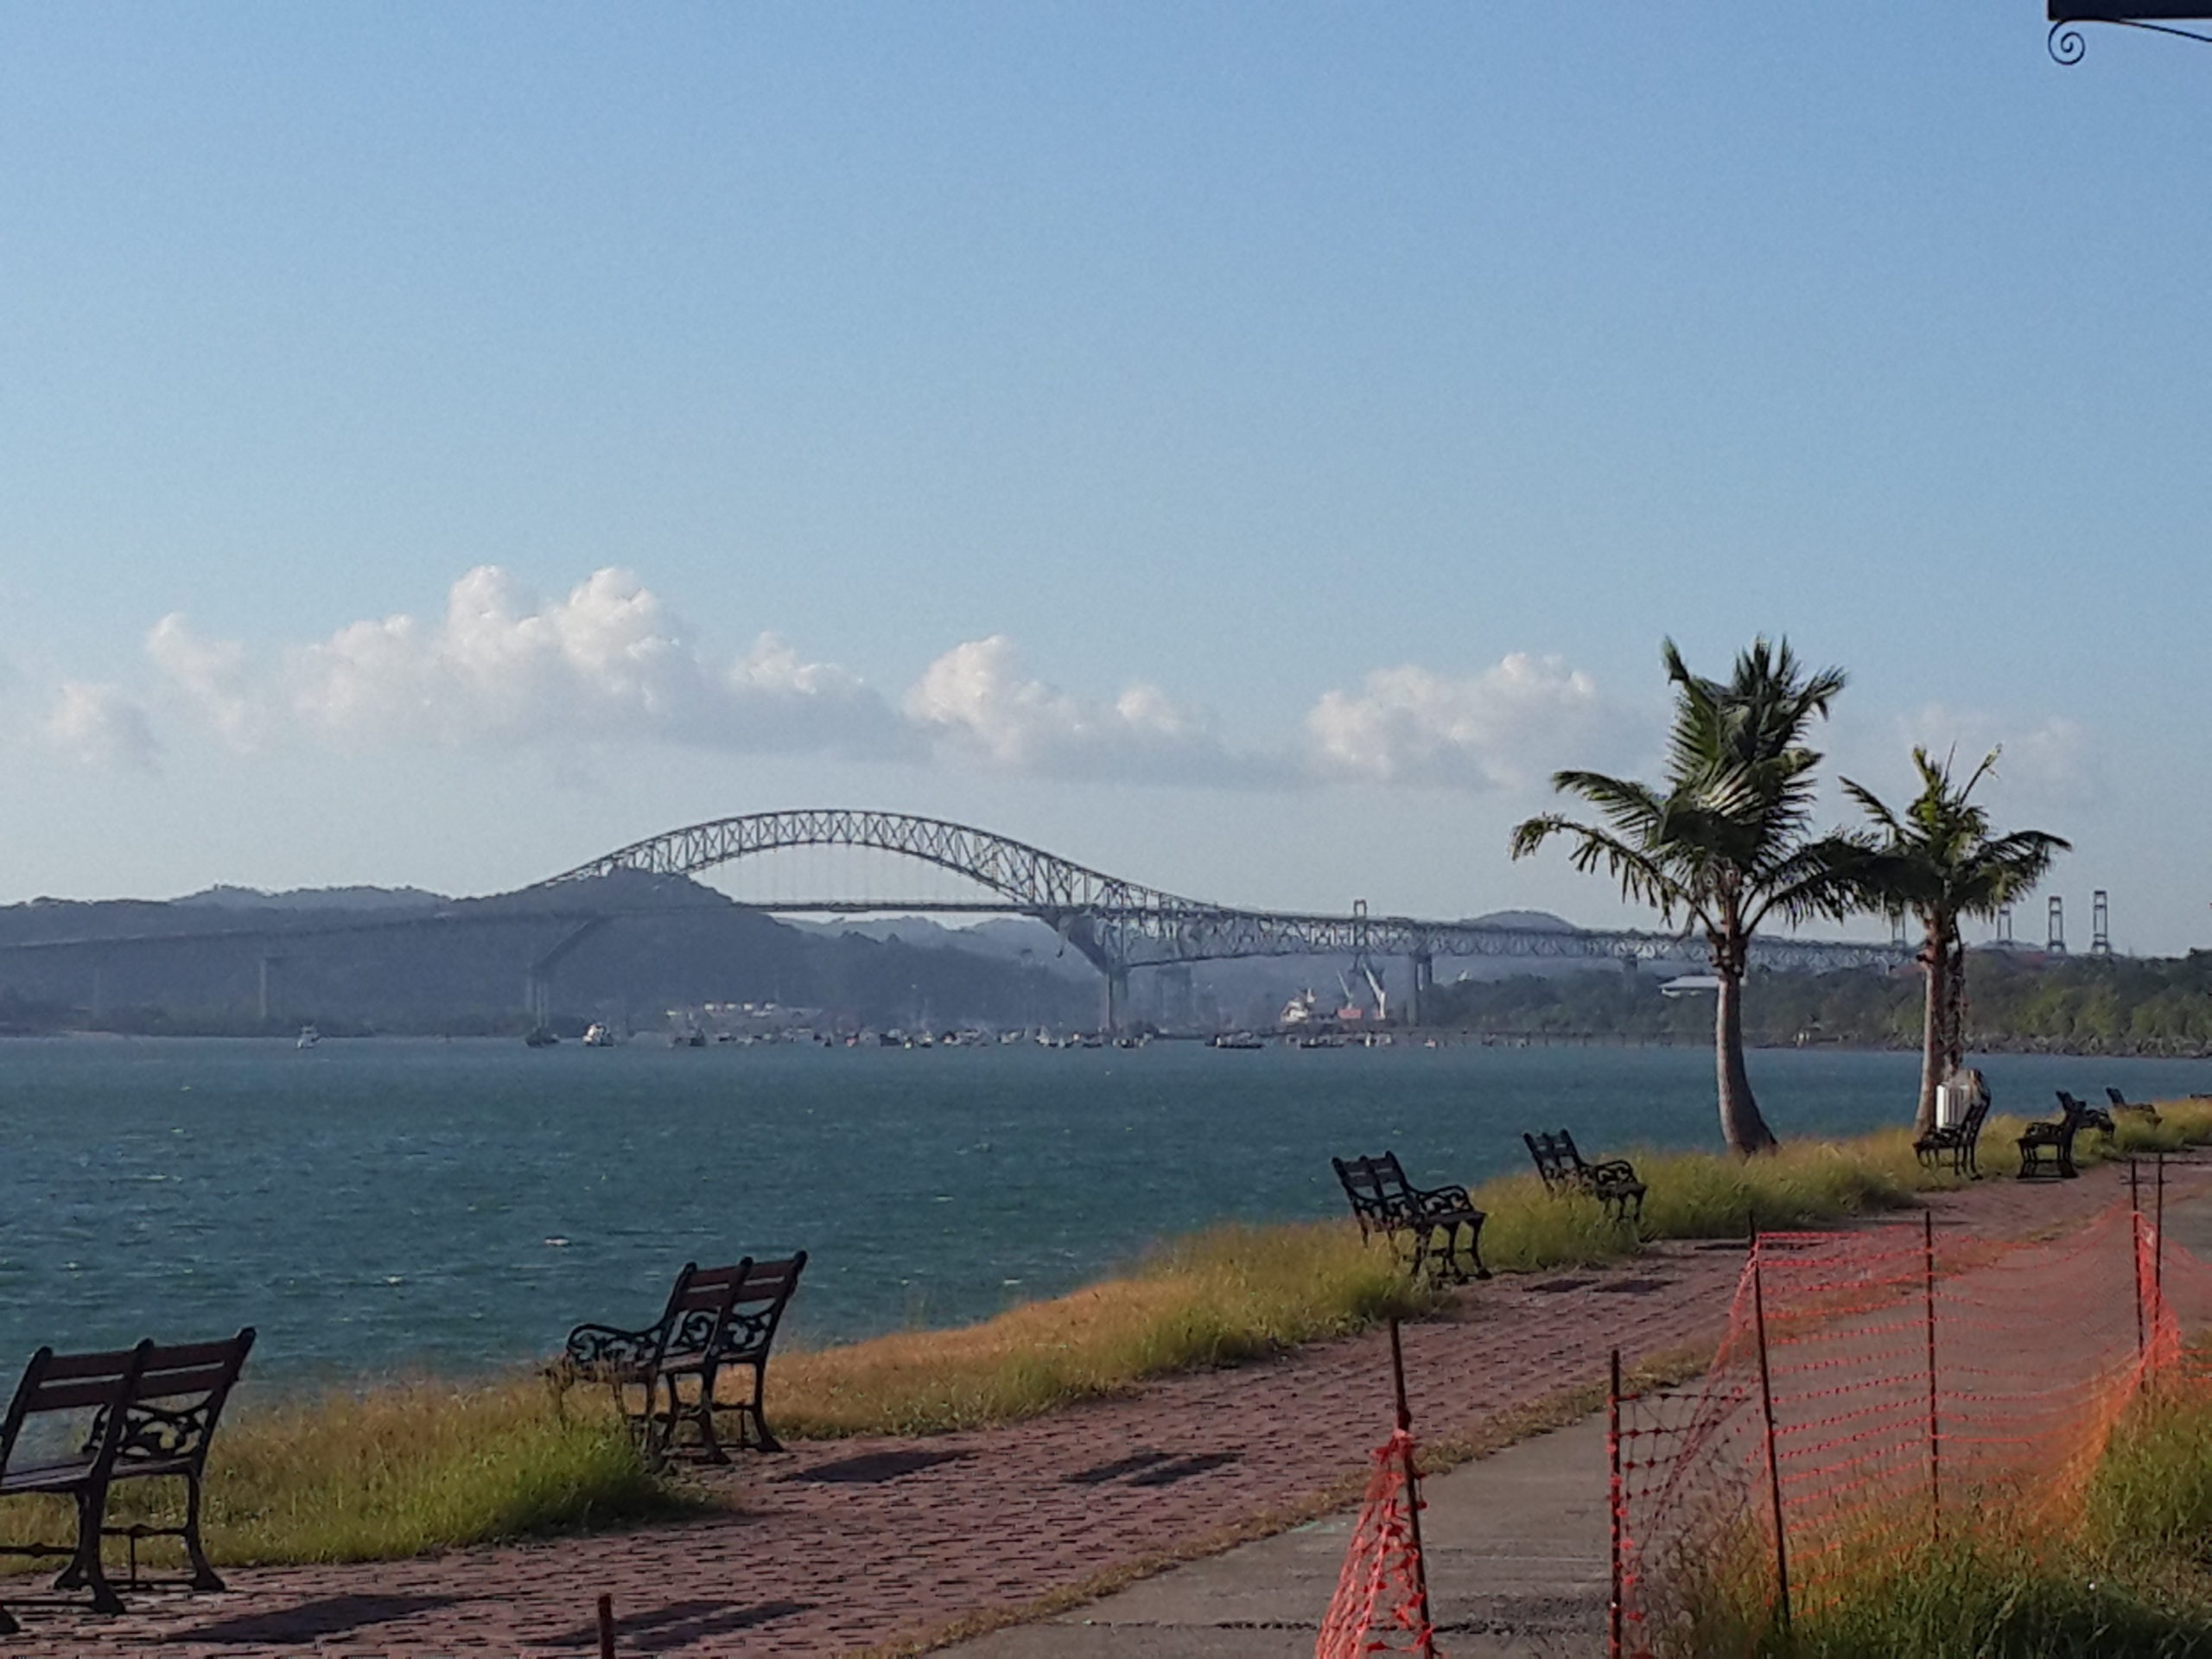 Bridge Of The Americas From Causeway Amador Scaled, Spanish Classes In Panama | Learn Spanish Abroad | Spanish Language Immersion Programs